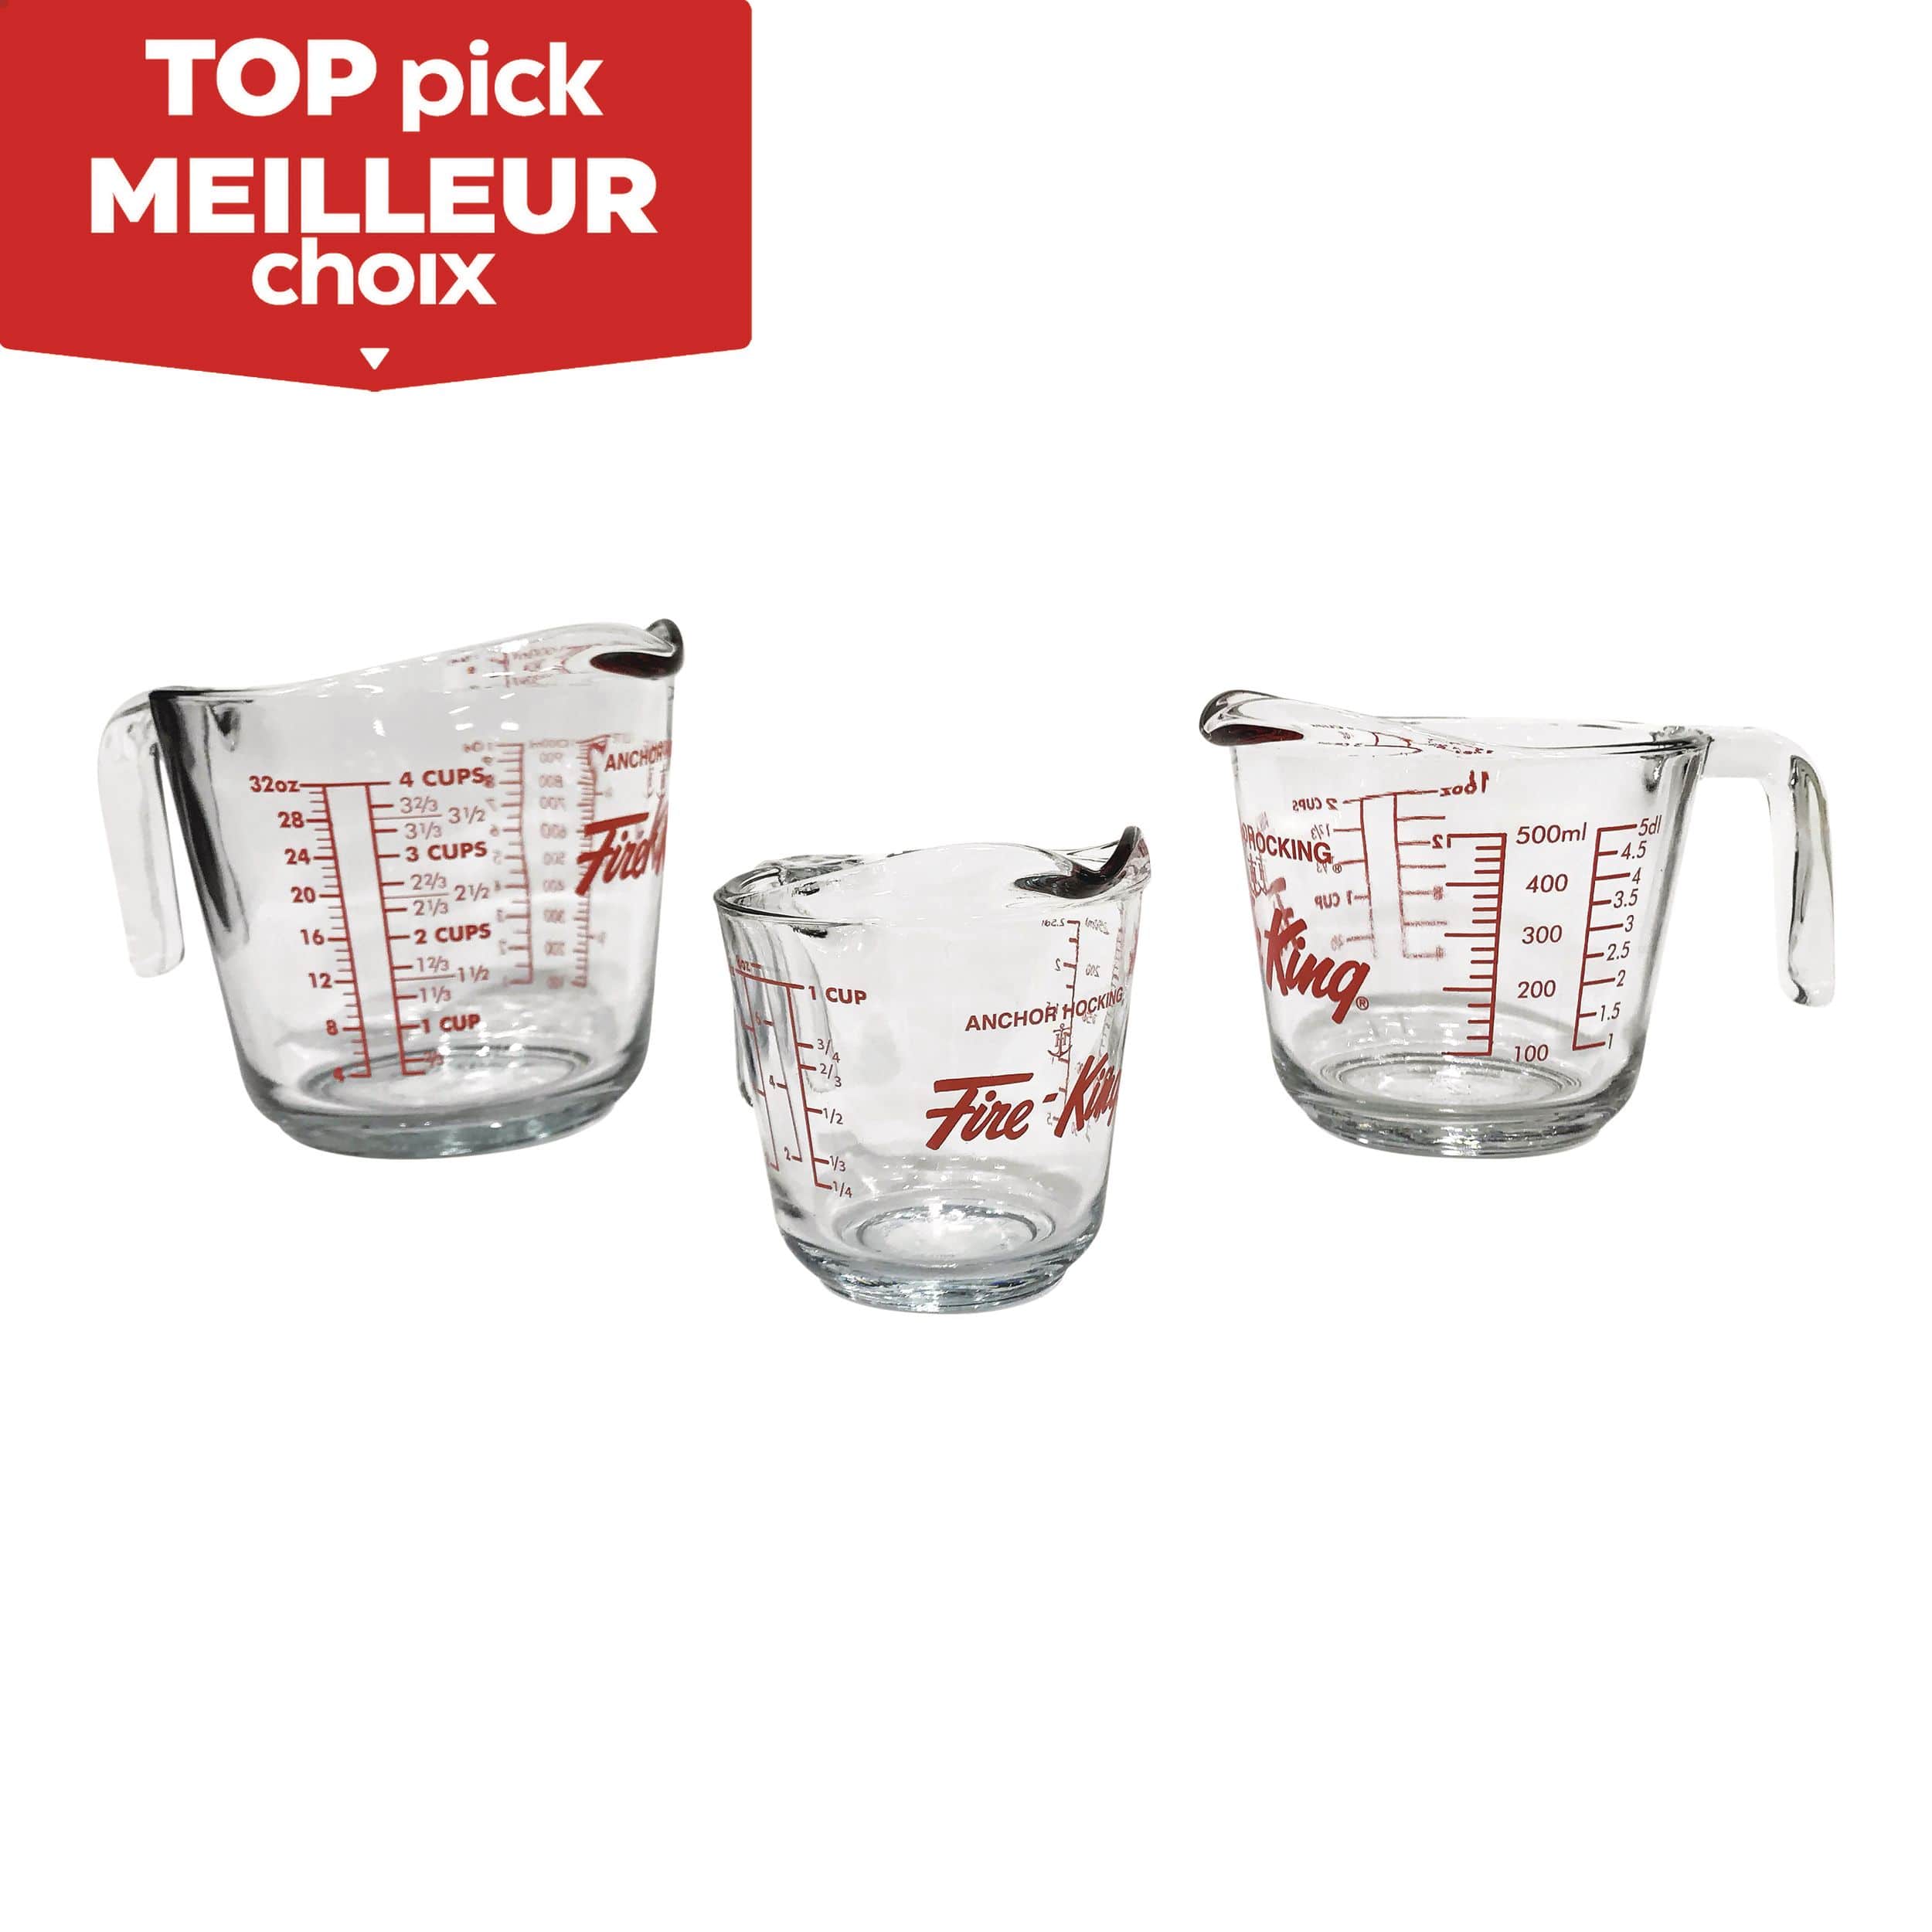 US Kitchen Supply - 16 oz (500 ml) Plastic Graduated Measuring Cups with  Pitcher Handles (Pack of 6) - 2 Cup Capacity, Ounce and ML Cup Markings 